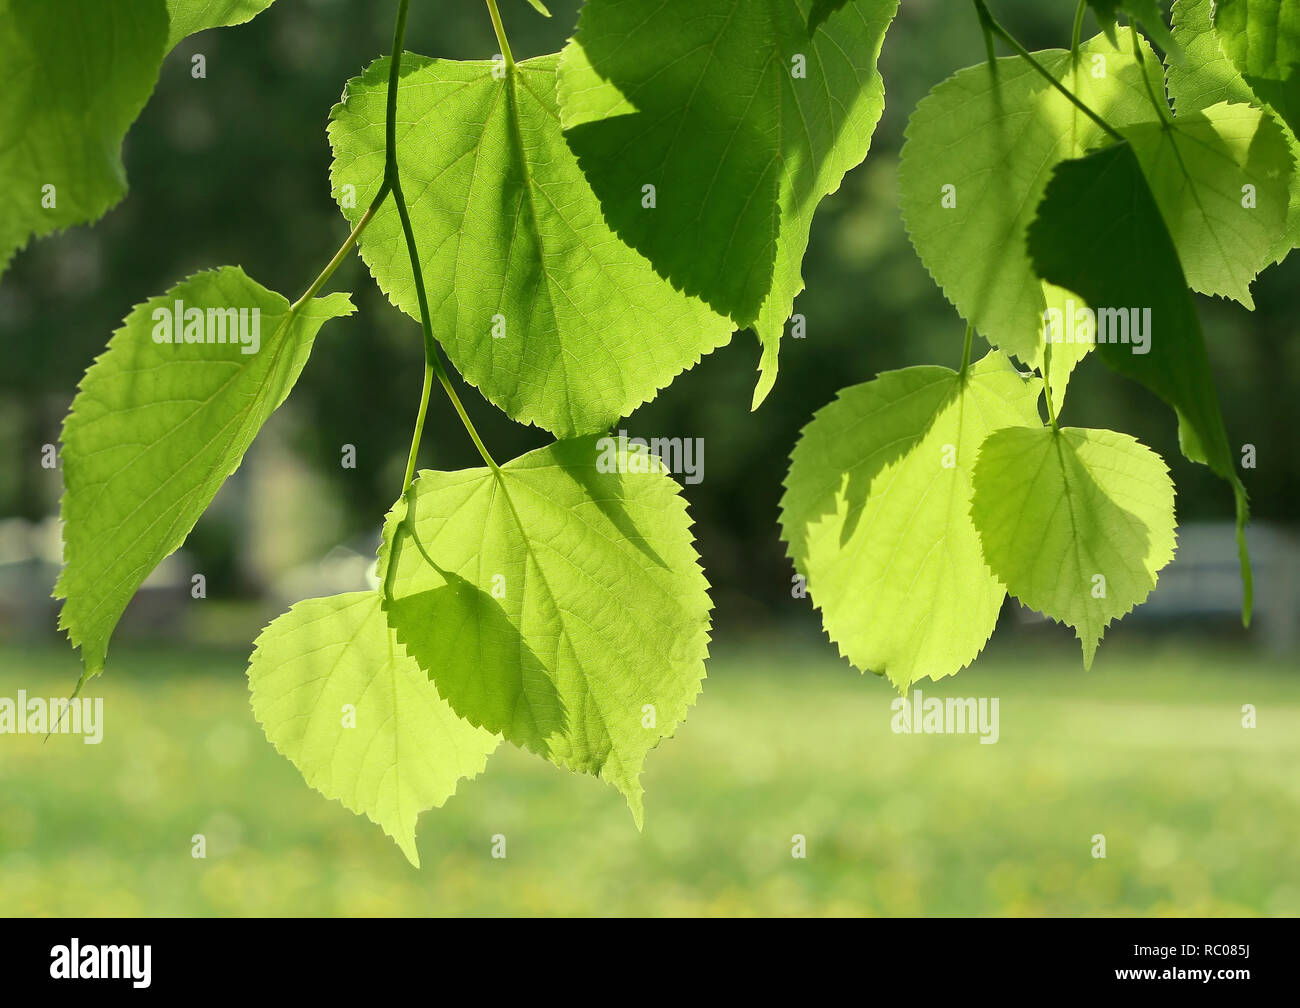 fresh green leaves of linden tree glowing in sunlight Stock Photo - Alamy